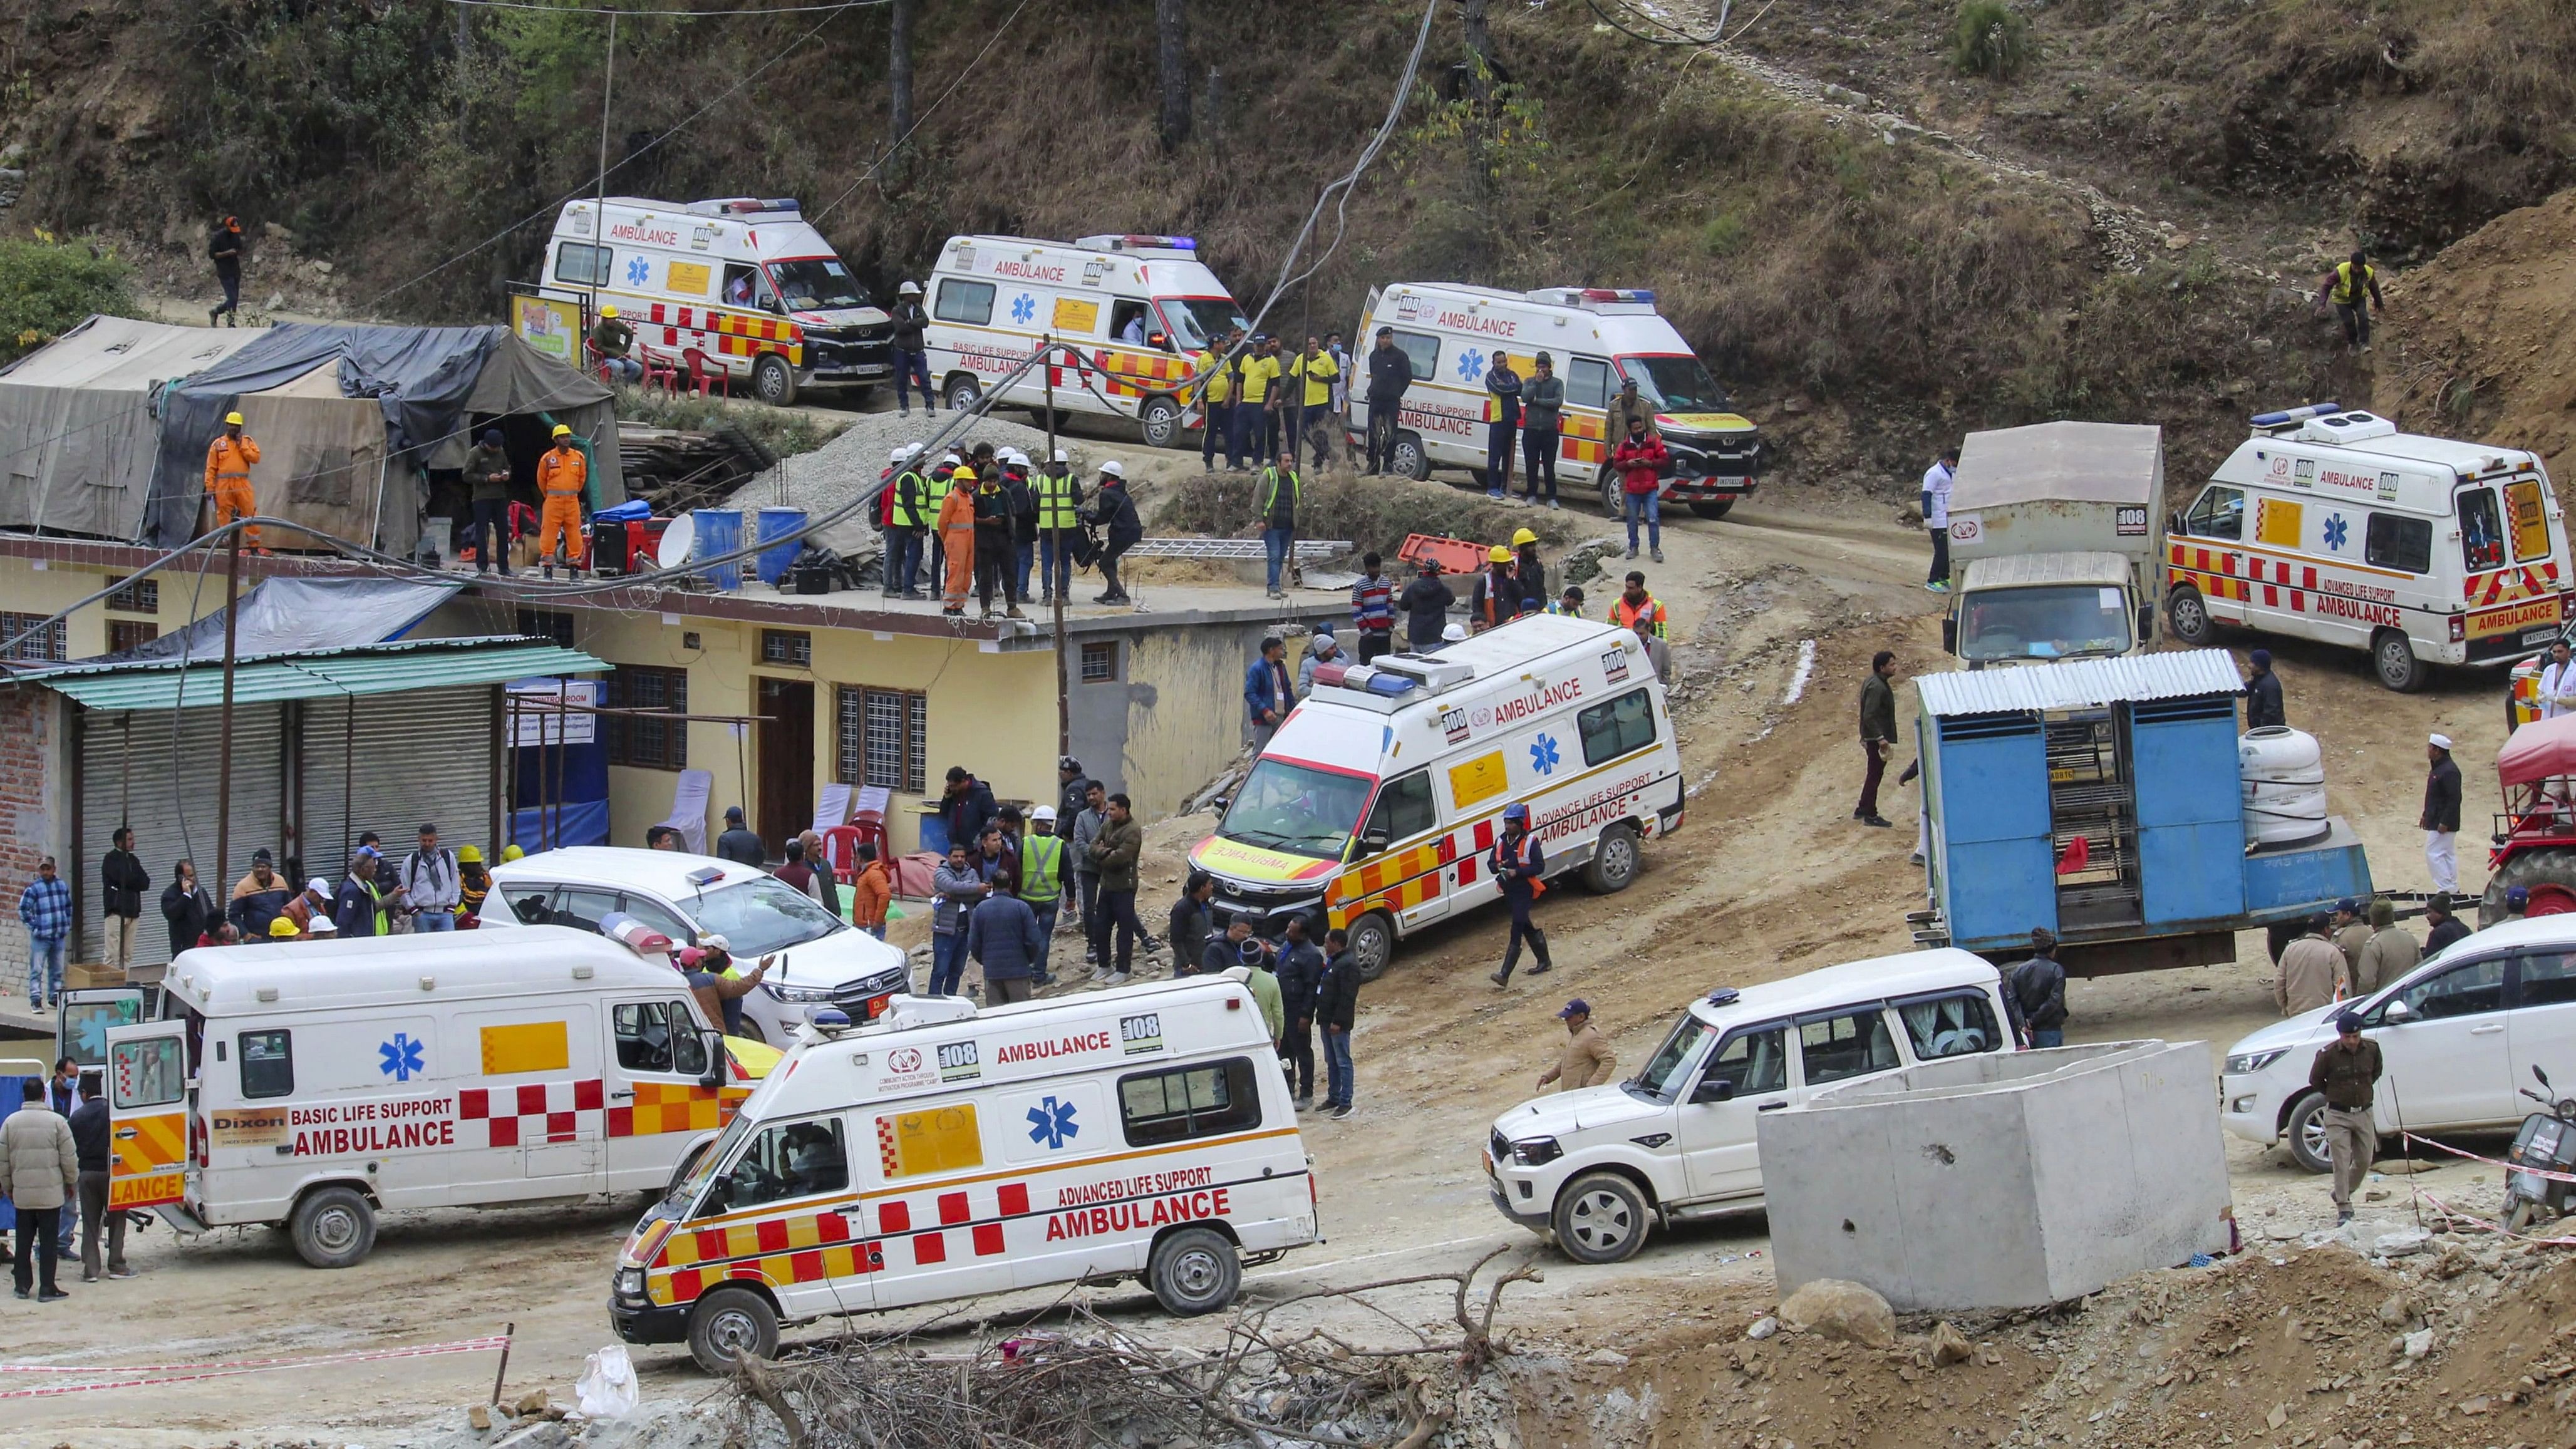 <div class="paragraphs"><p>Uttarkashi: Ambulances on standby during the ongoing rescue operation of the 41 workers trapped inside the under-construction Silkyara Bend-Barkot Tunnel, in Uttarkashi district.</p></div>